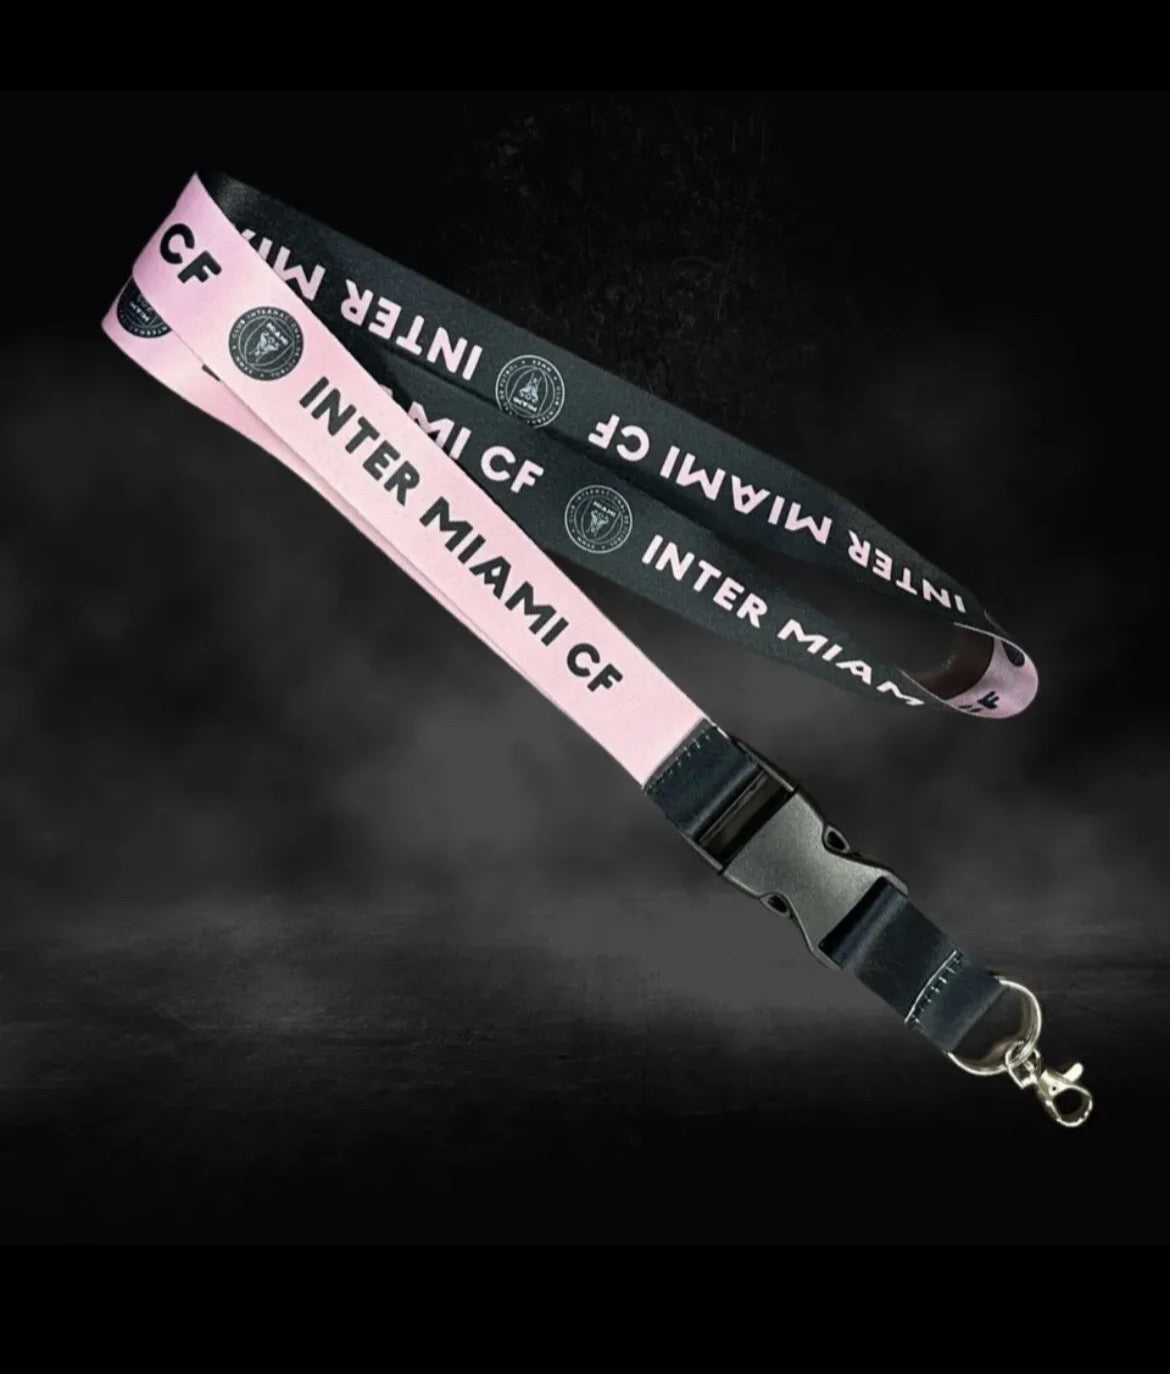 Official Lanyard of Inter Miami